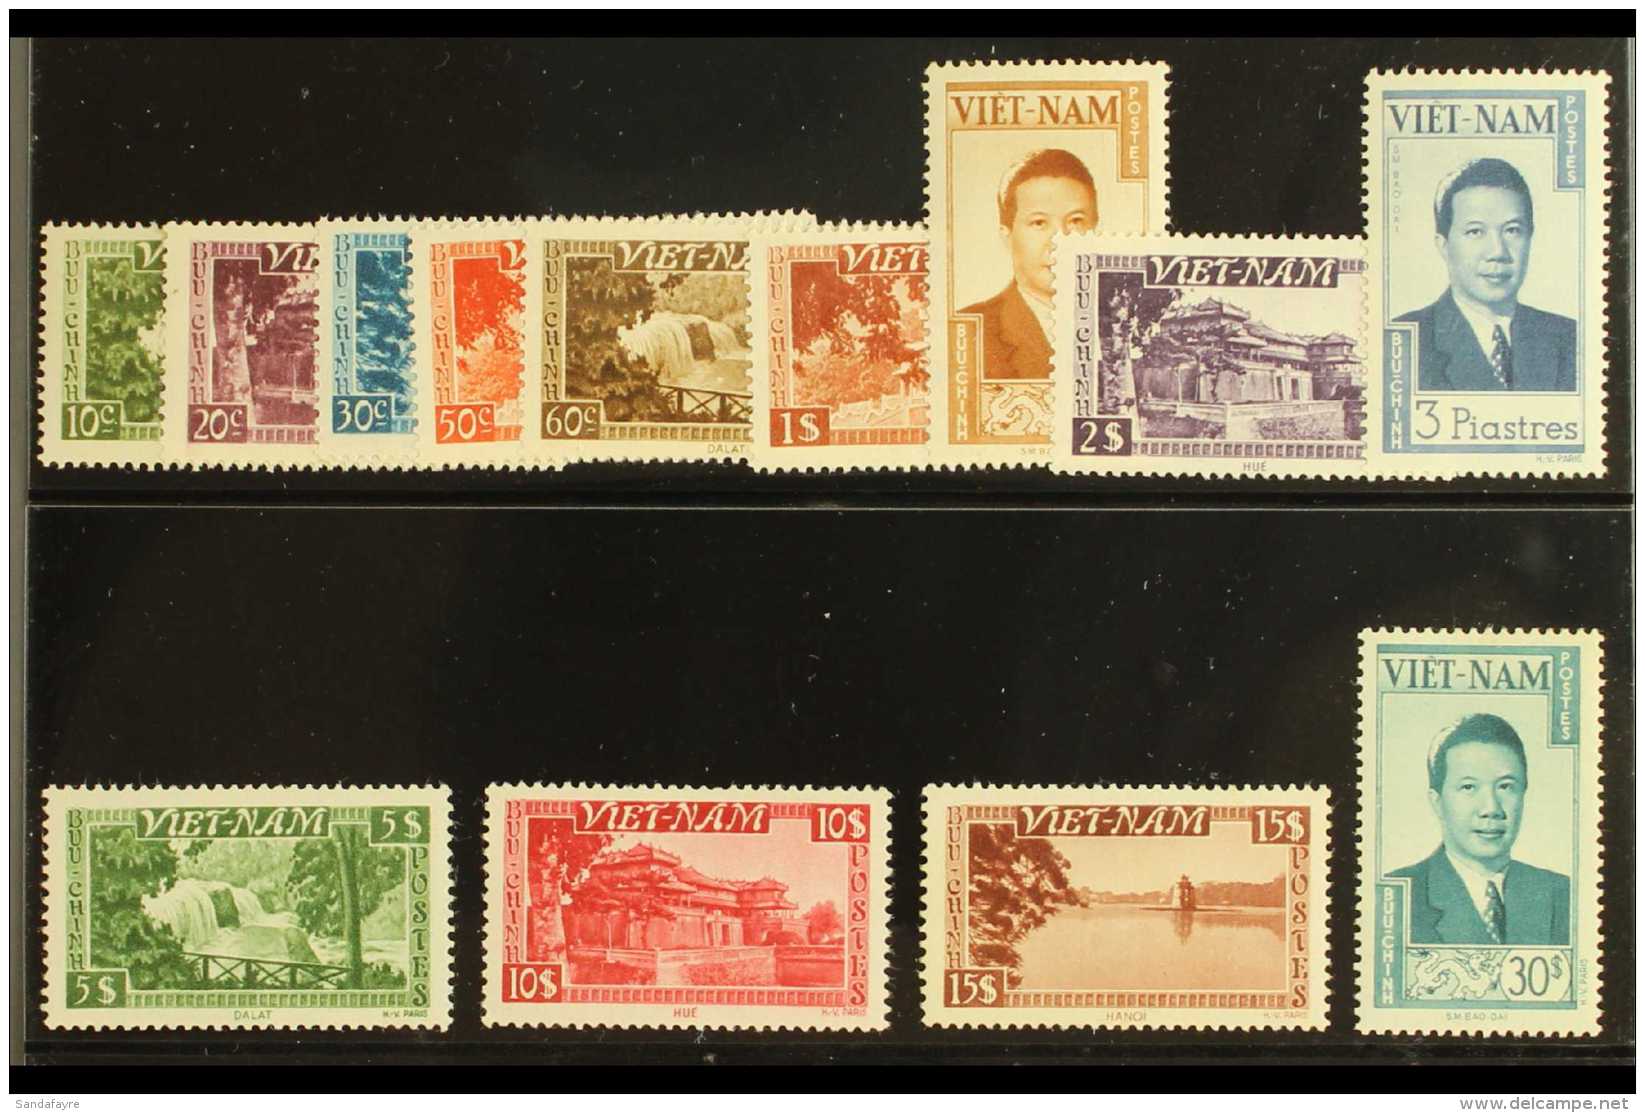 INDEPENDENT STATE 1951 Definitives Complete Set (SG 61/73, Scott 1/13) Very Fine Never Hinged Mint. (13 Stamps)... - Vietnam